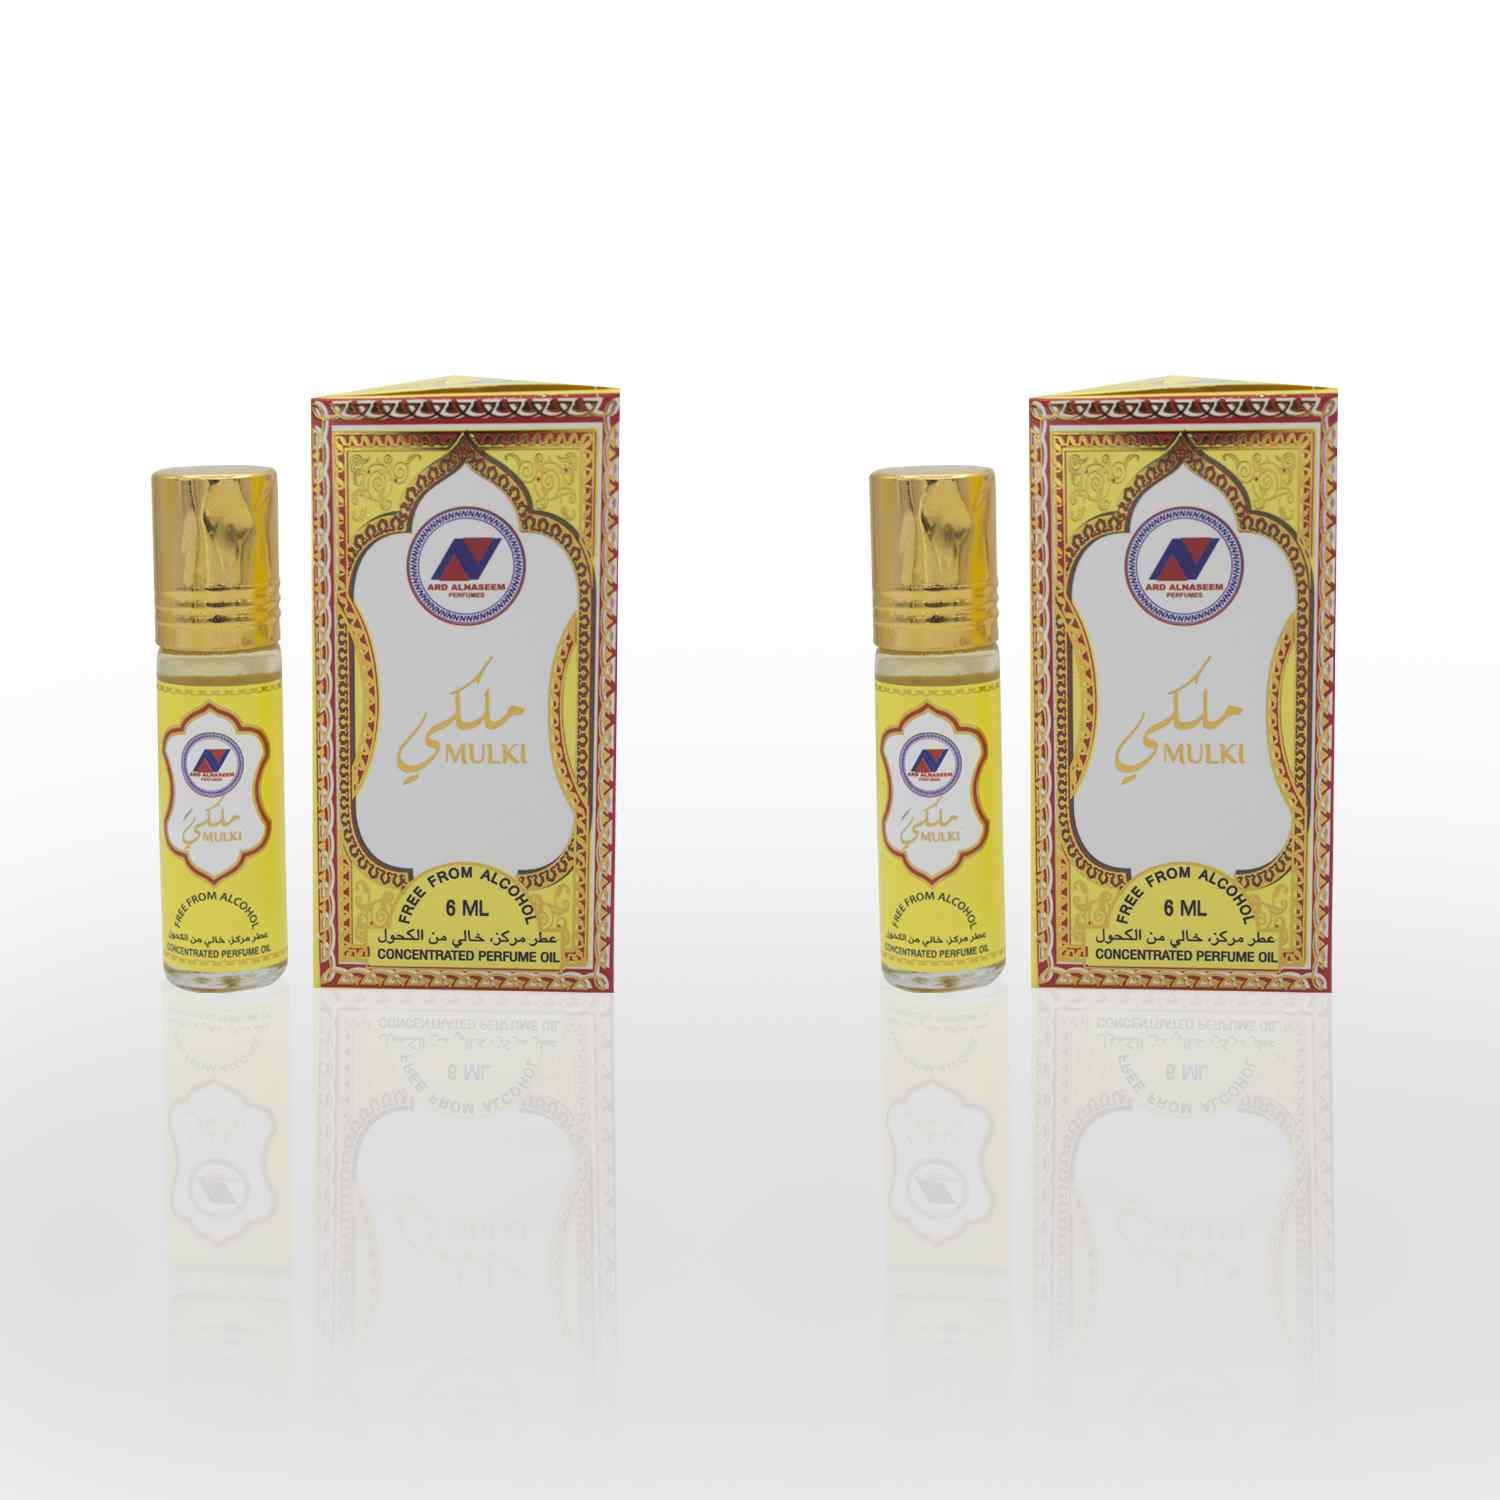 Mulki concentrated oil attar rollon 6ml by Ard perfumes